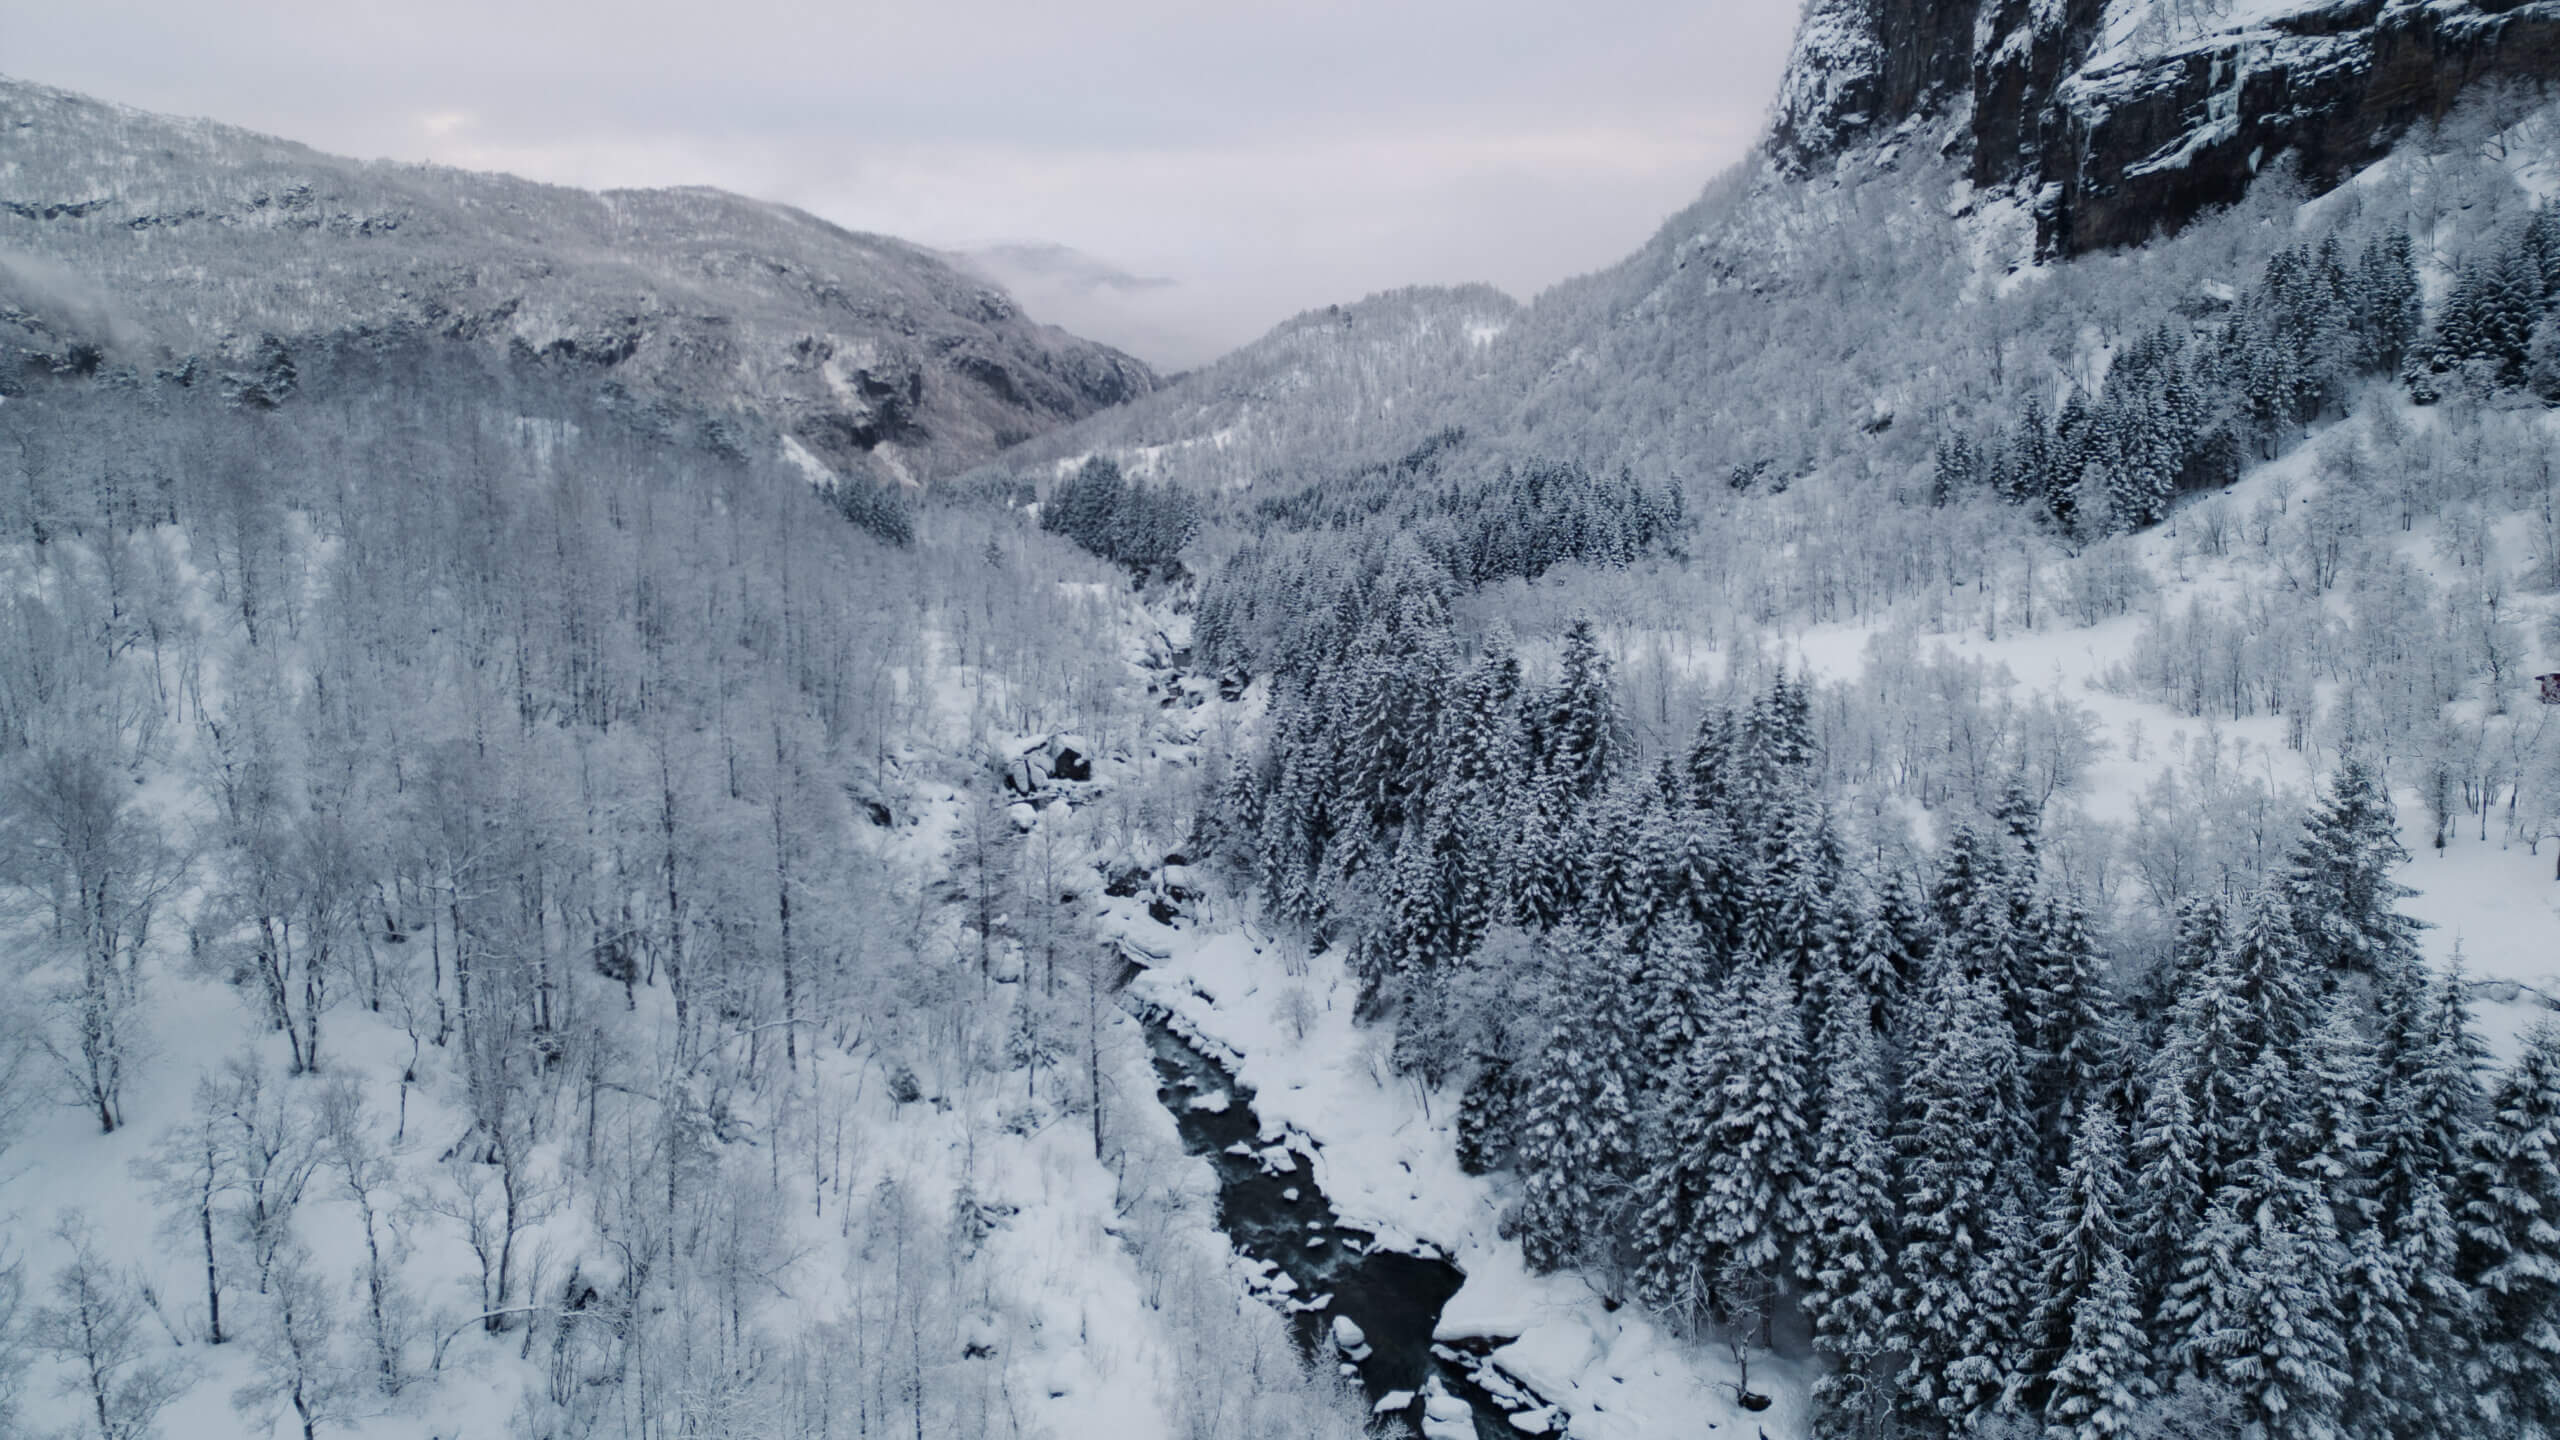 Aerial image of Åbødalen valley in winter - the valley is covered in snow, a river snaking through a forested snowdraped landscape.